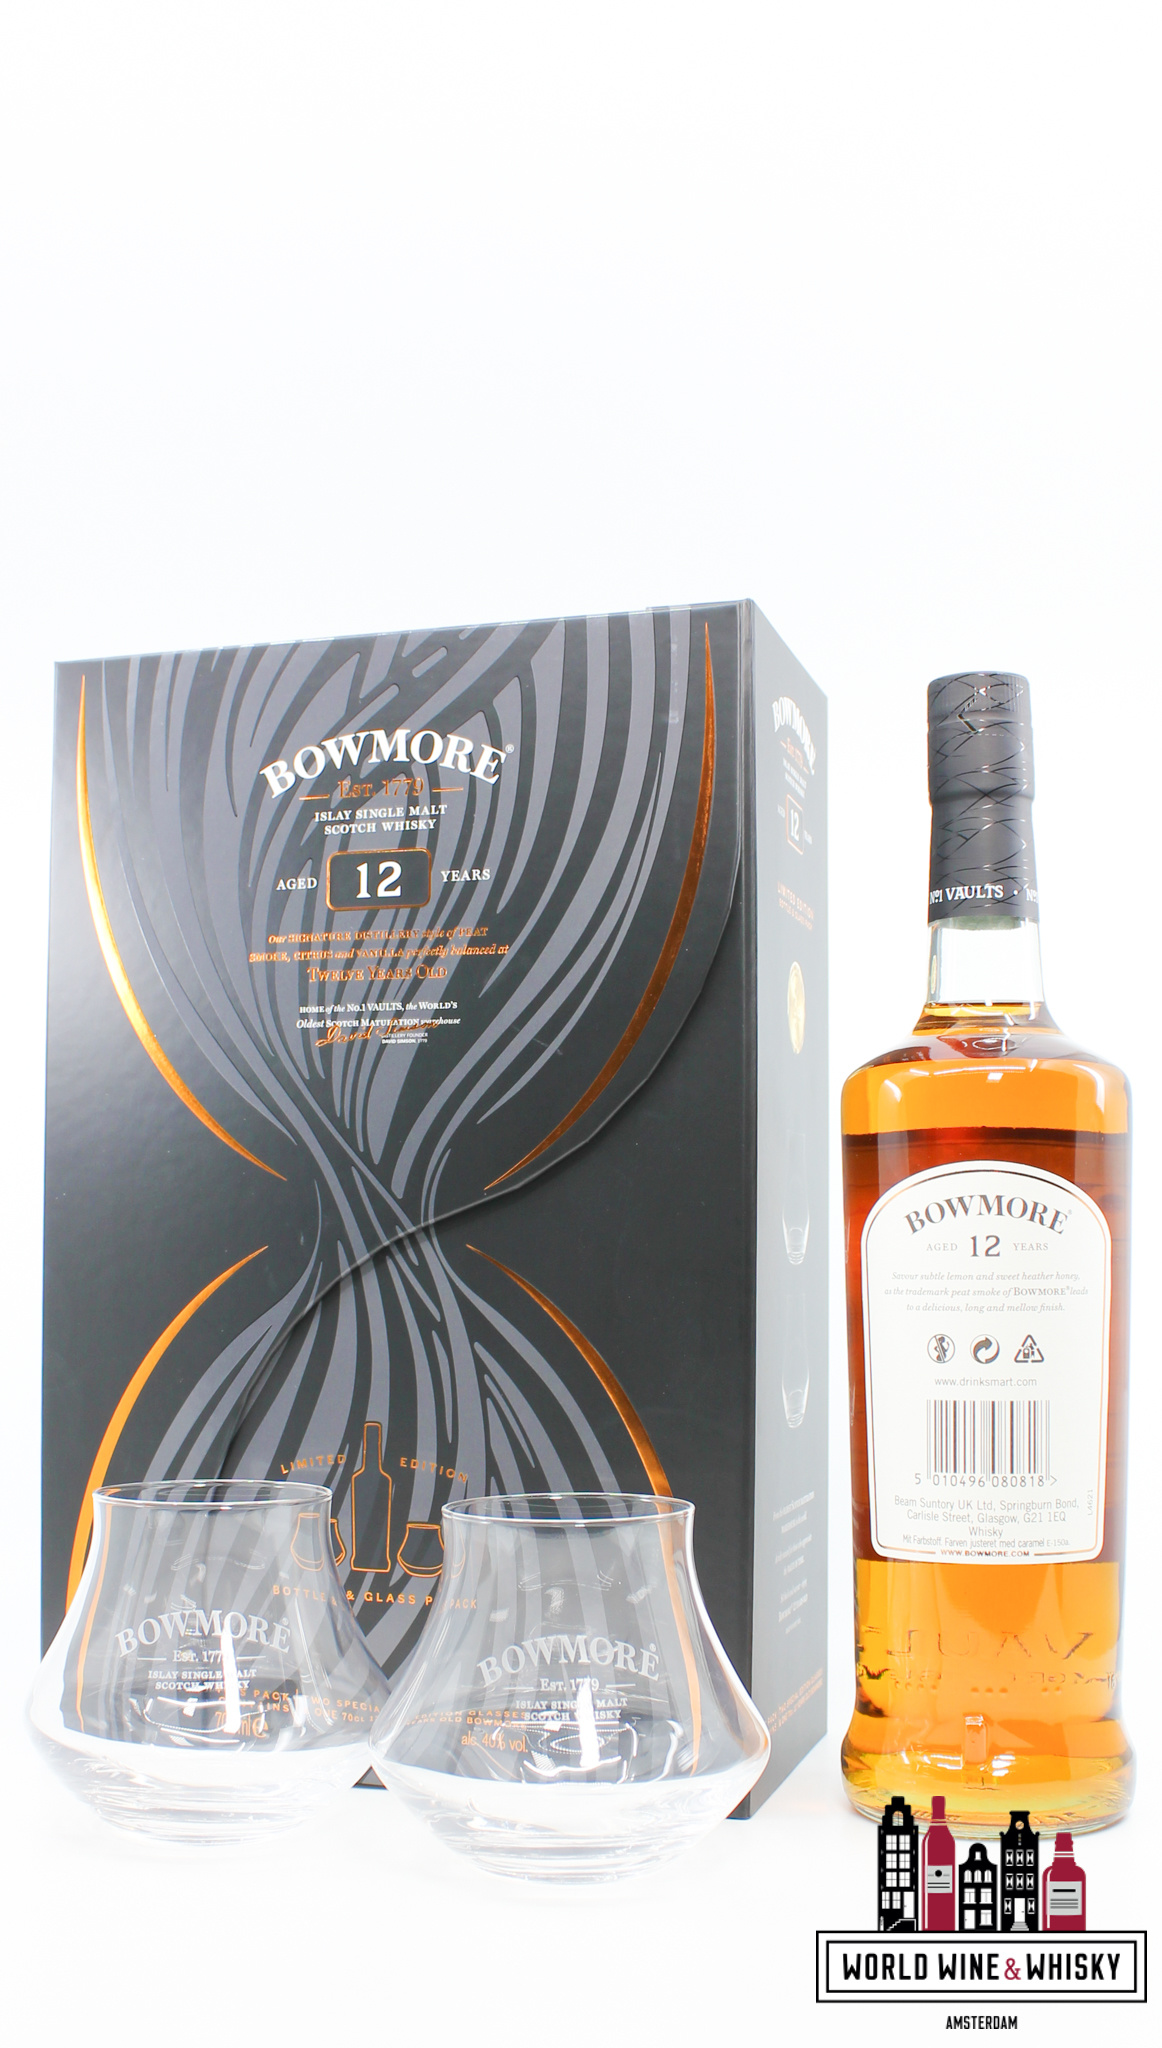 Bowmore 12 Years Old, Giftpack / Giftbox incl. two special glasses 40% -  World Wine & Whisky